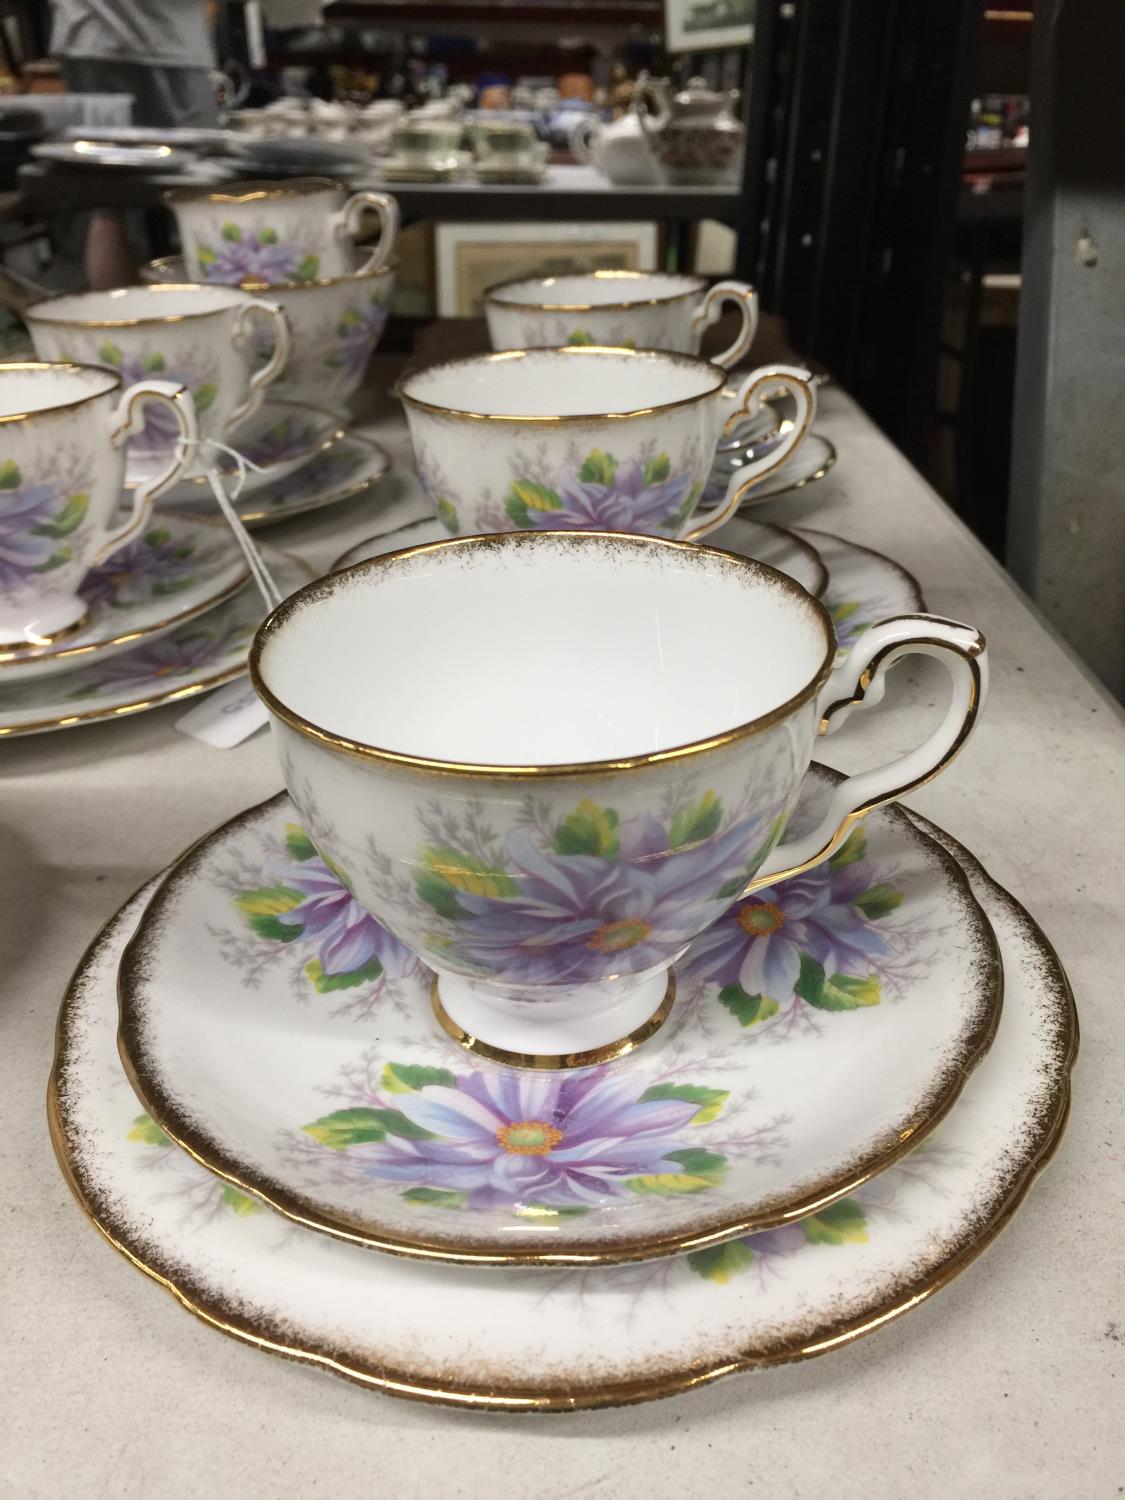 A ROYAL STAFFORD 'DAHLIA' TEASET TO INCLUDE CAKE PLATE, CREAM JUG, SUGAR BOWL, CUPS, SAUCERS AND - Image 2 of 3